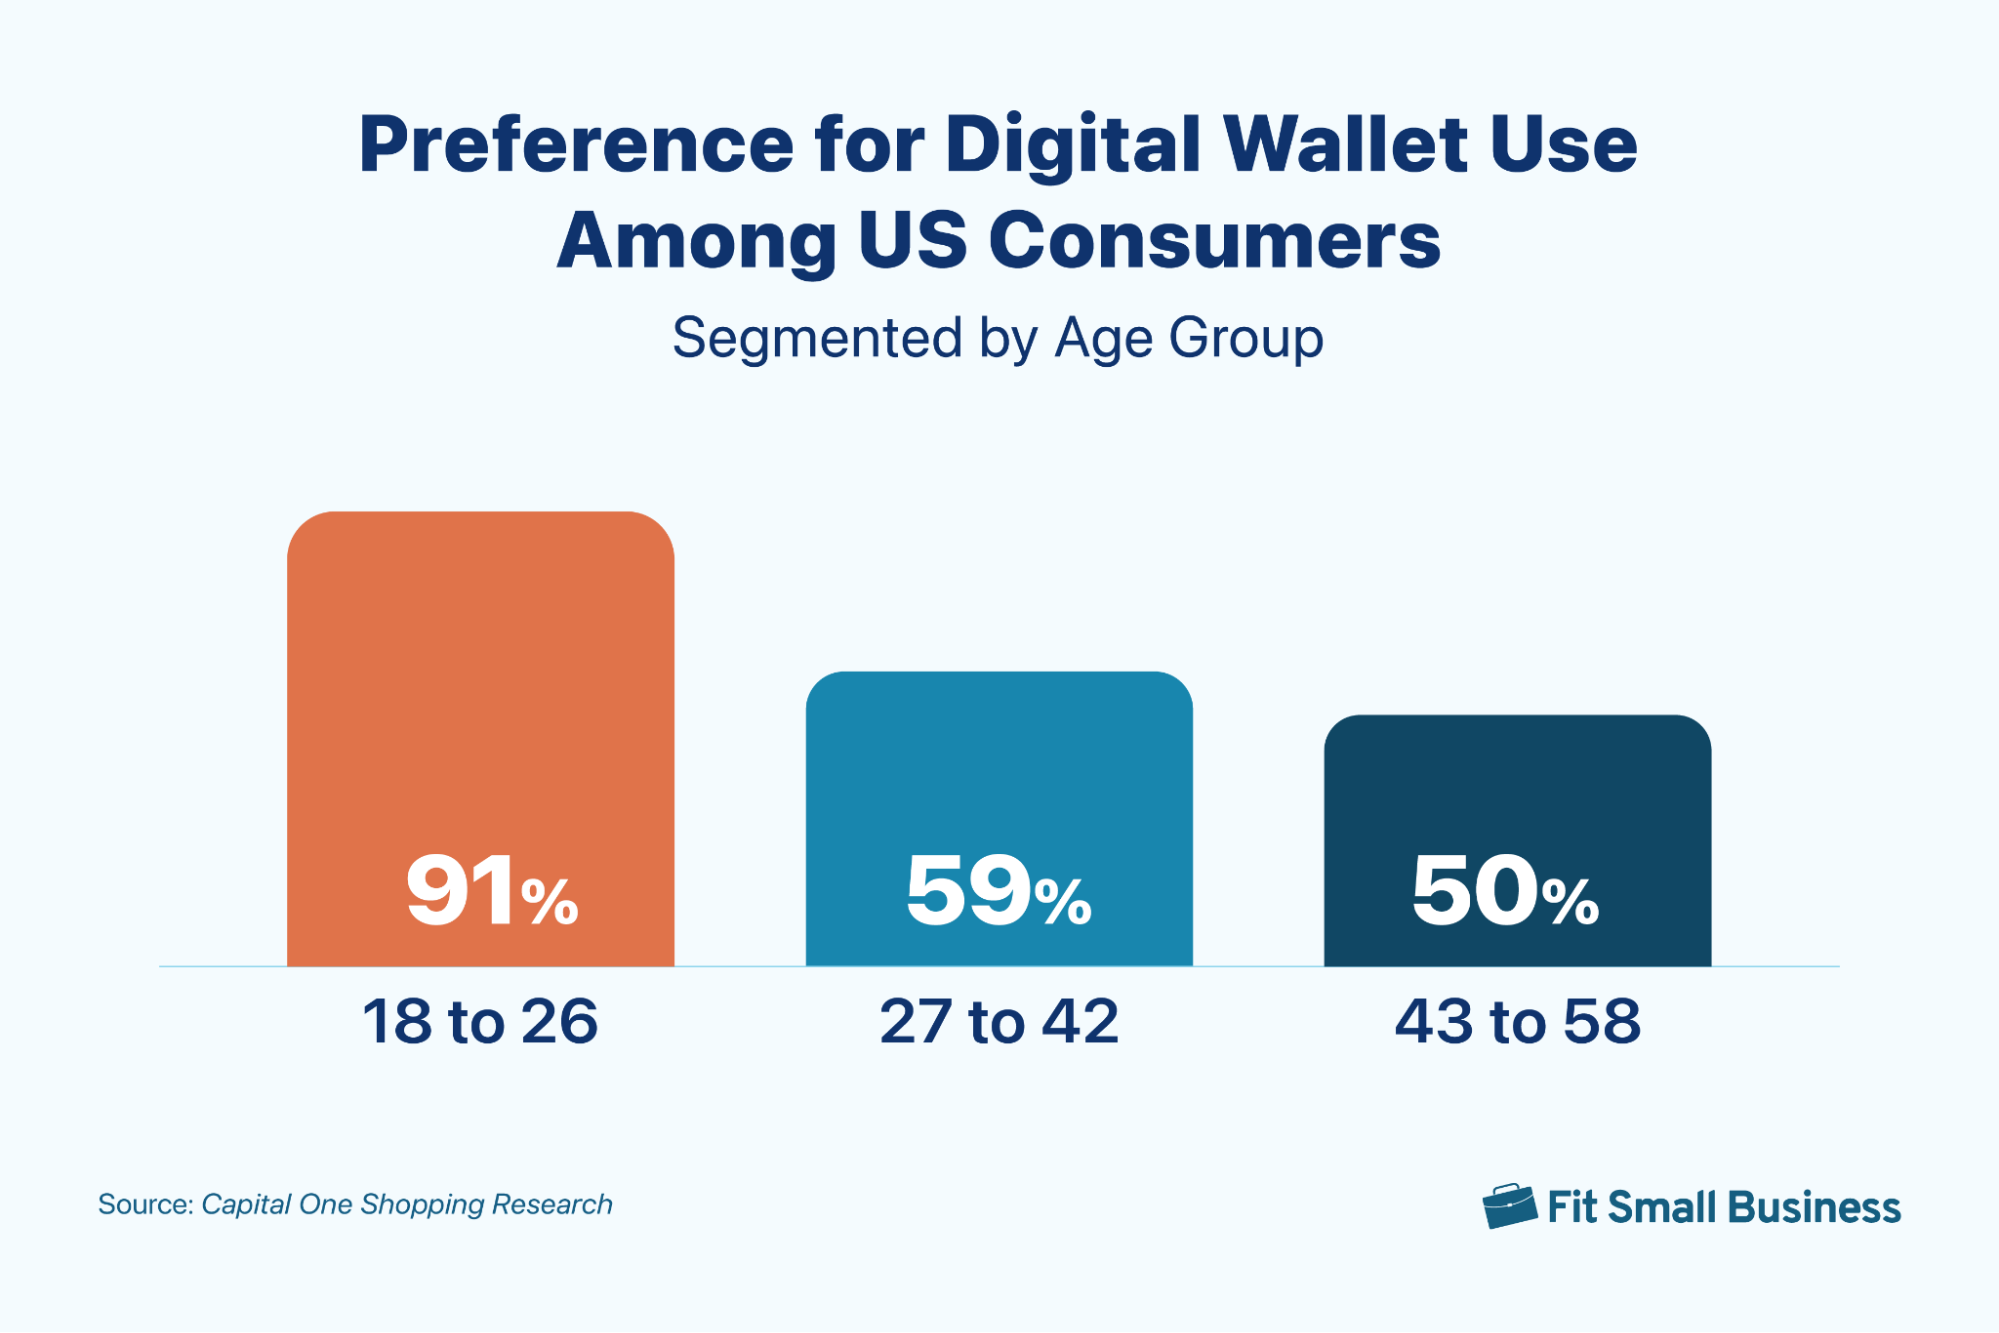 Bar graph showing preference of digital wallet use among US consumers across age groups.